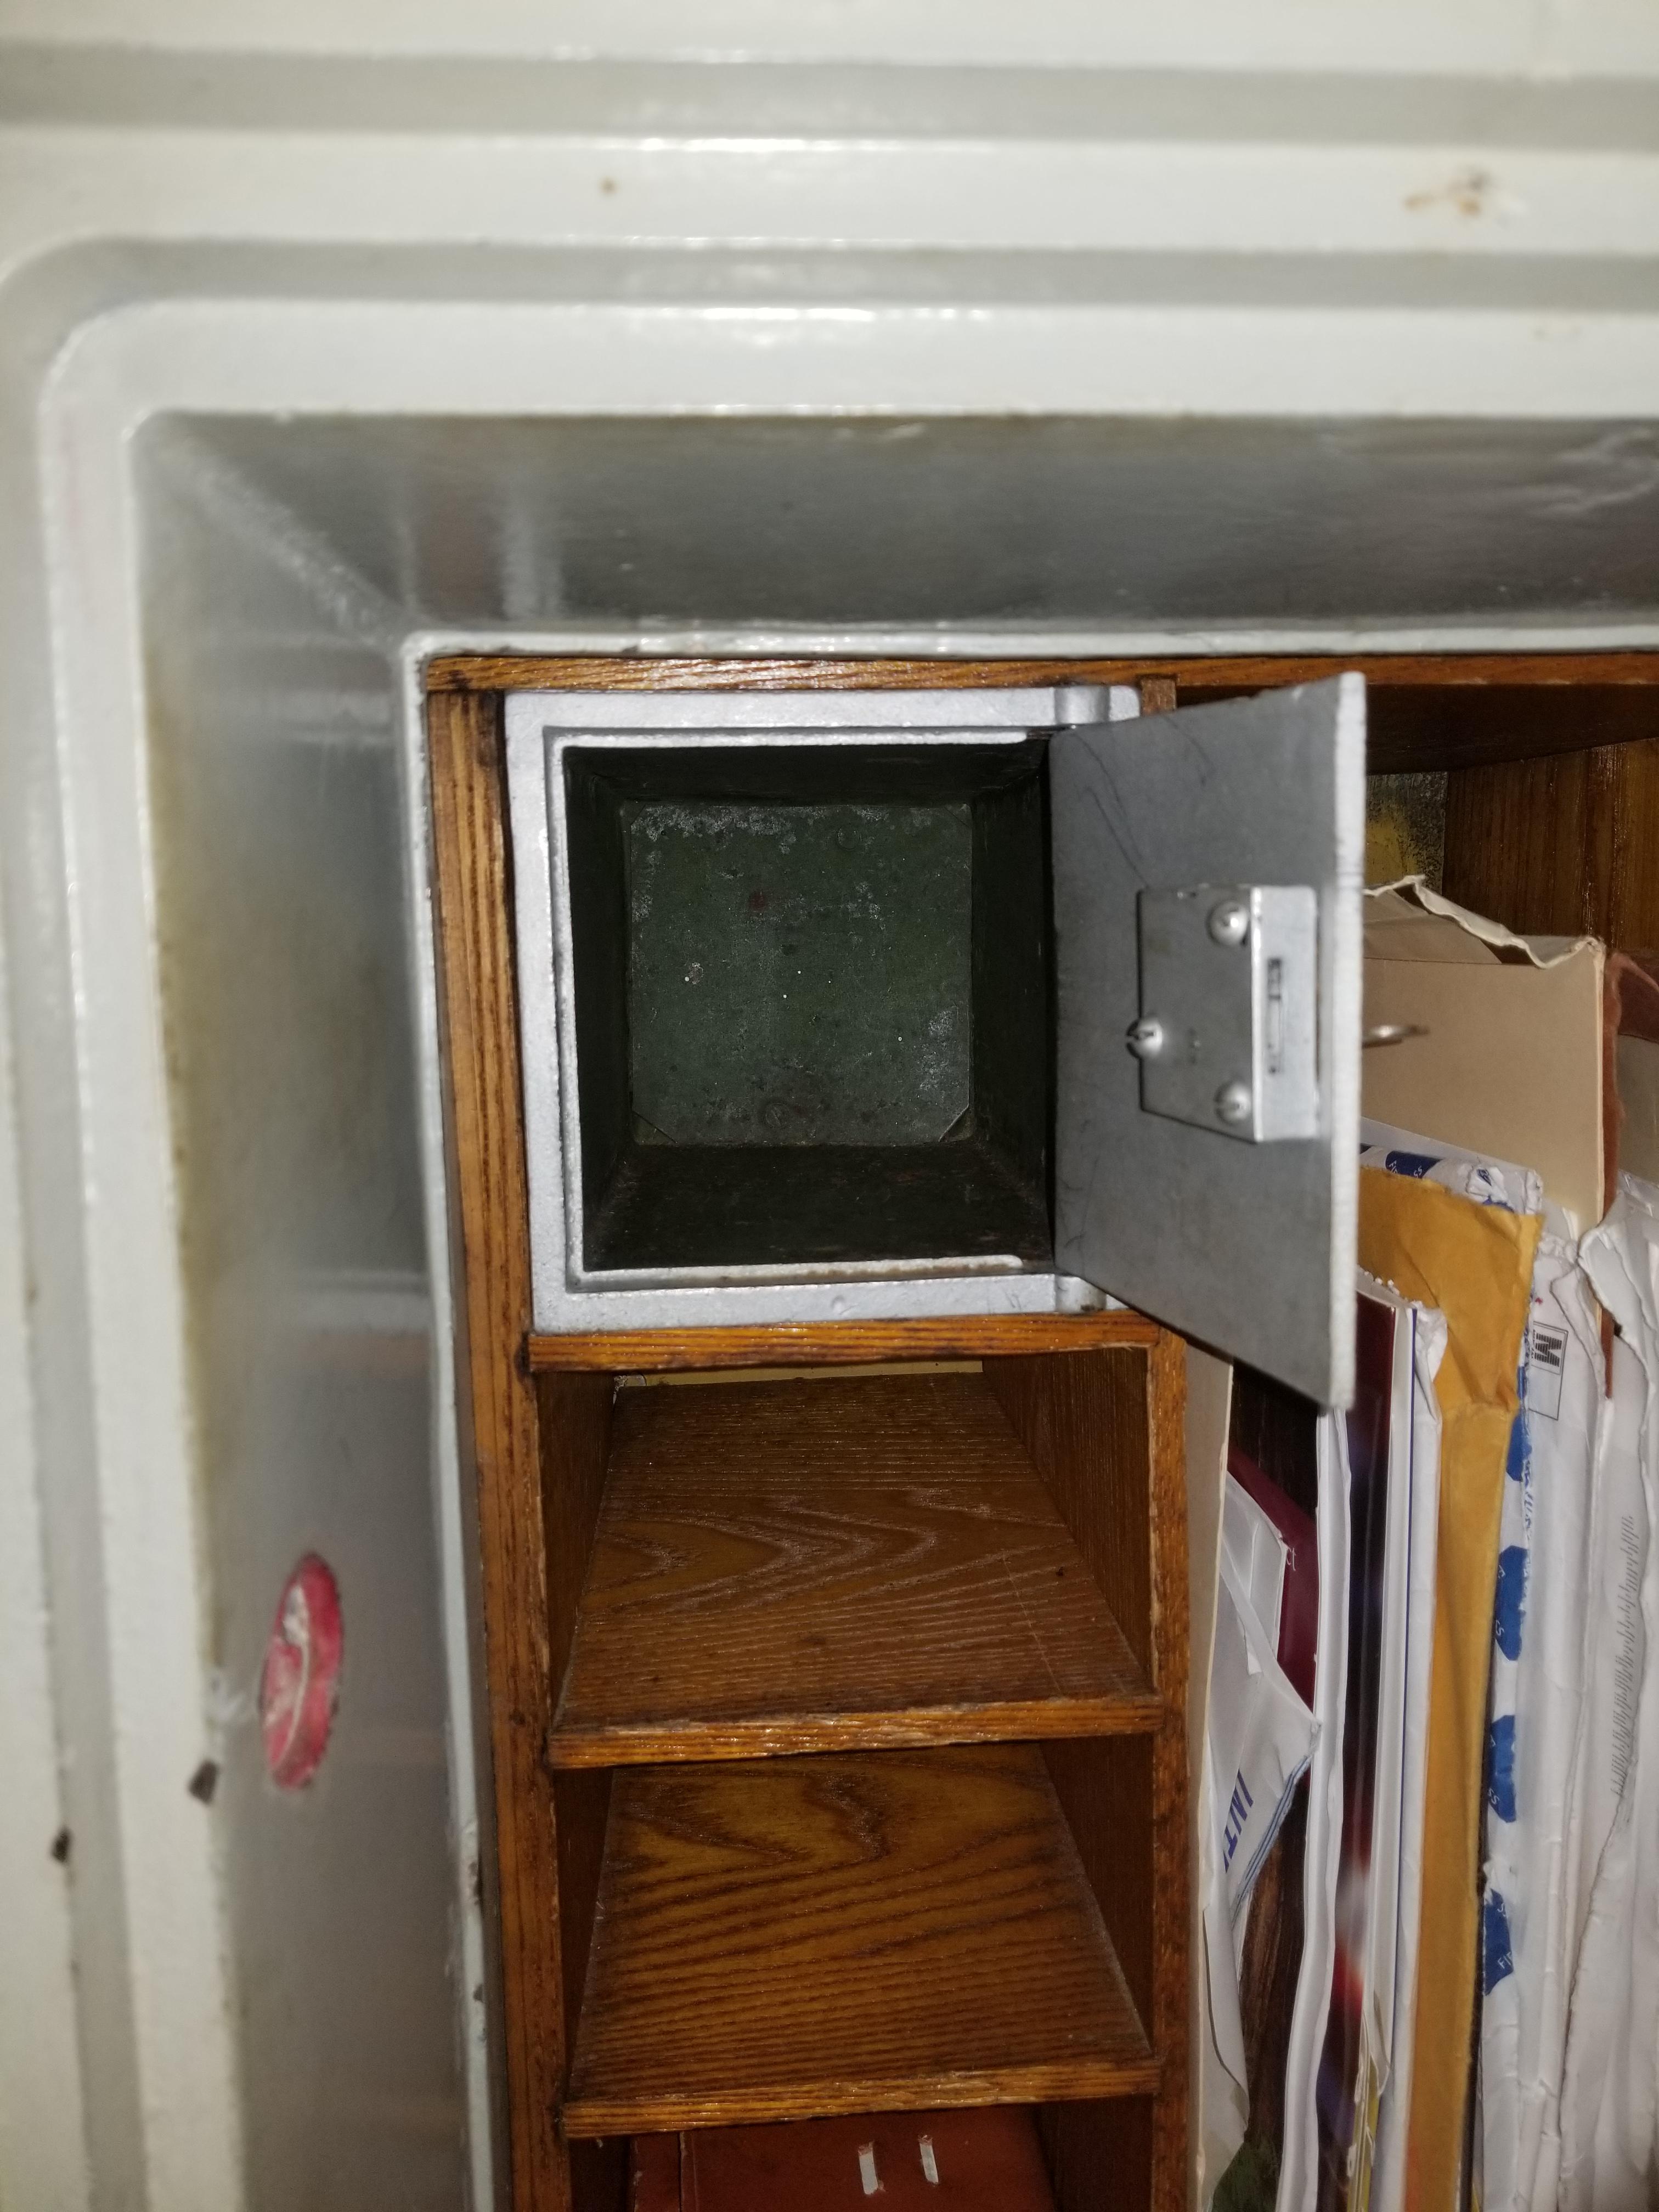 Empty jewelry compartment in an old safe.